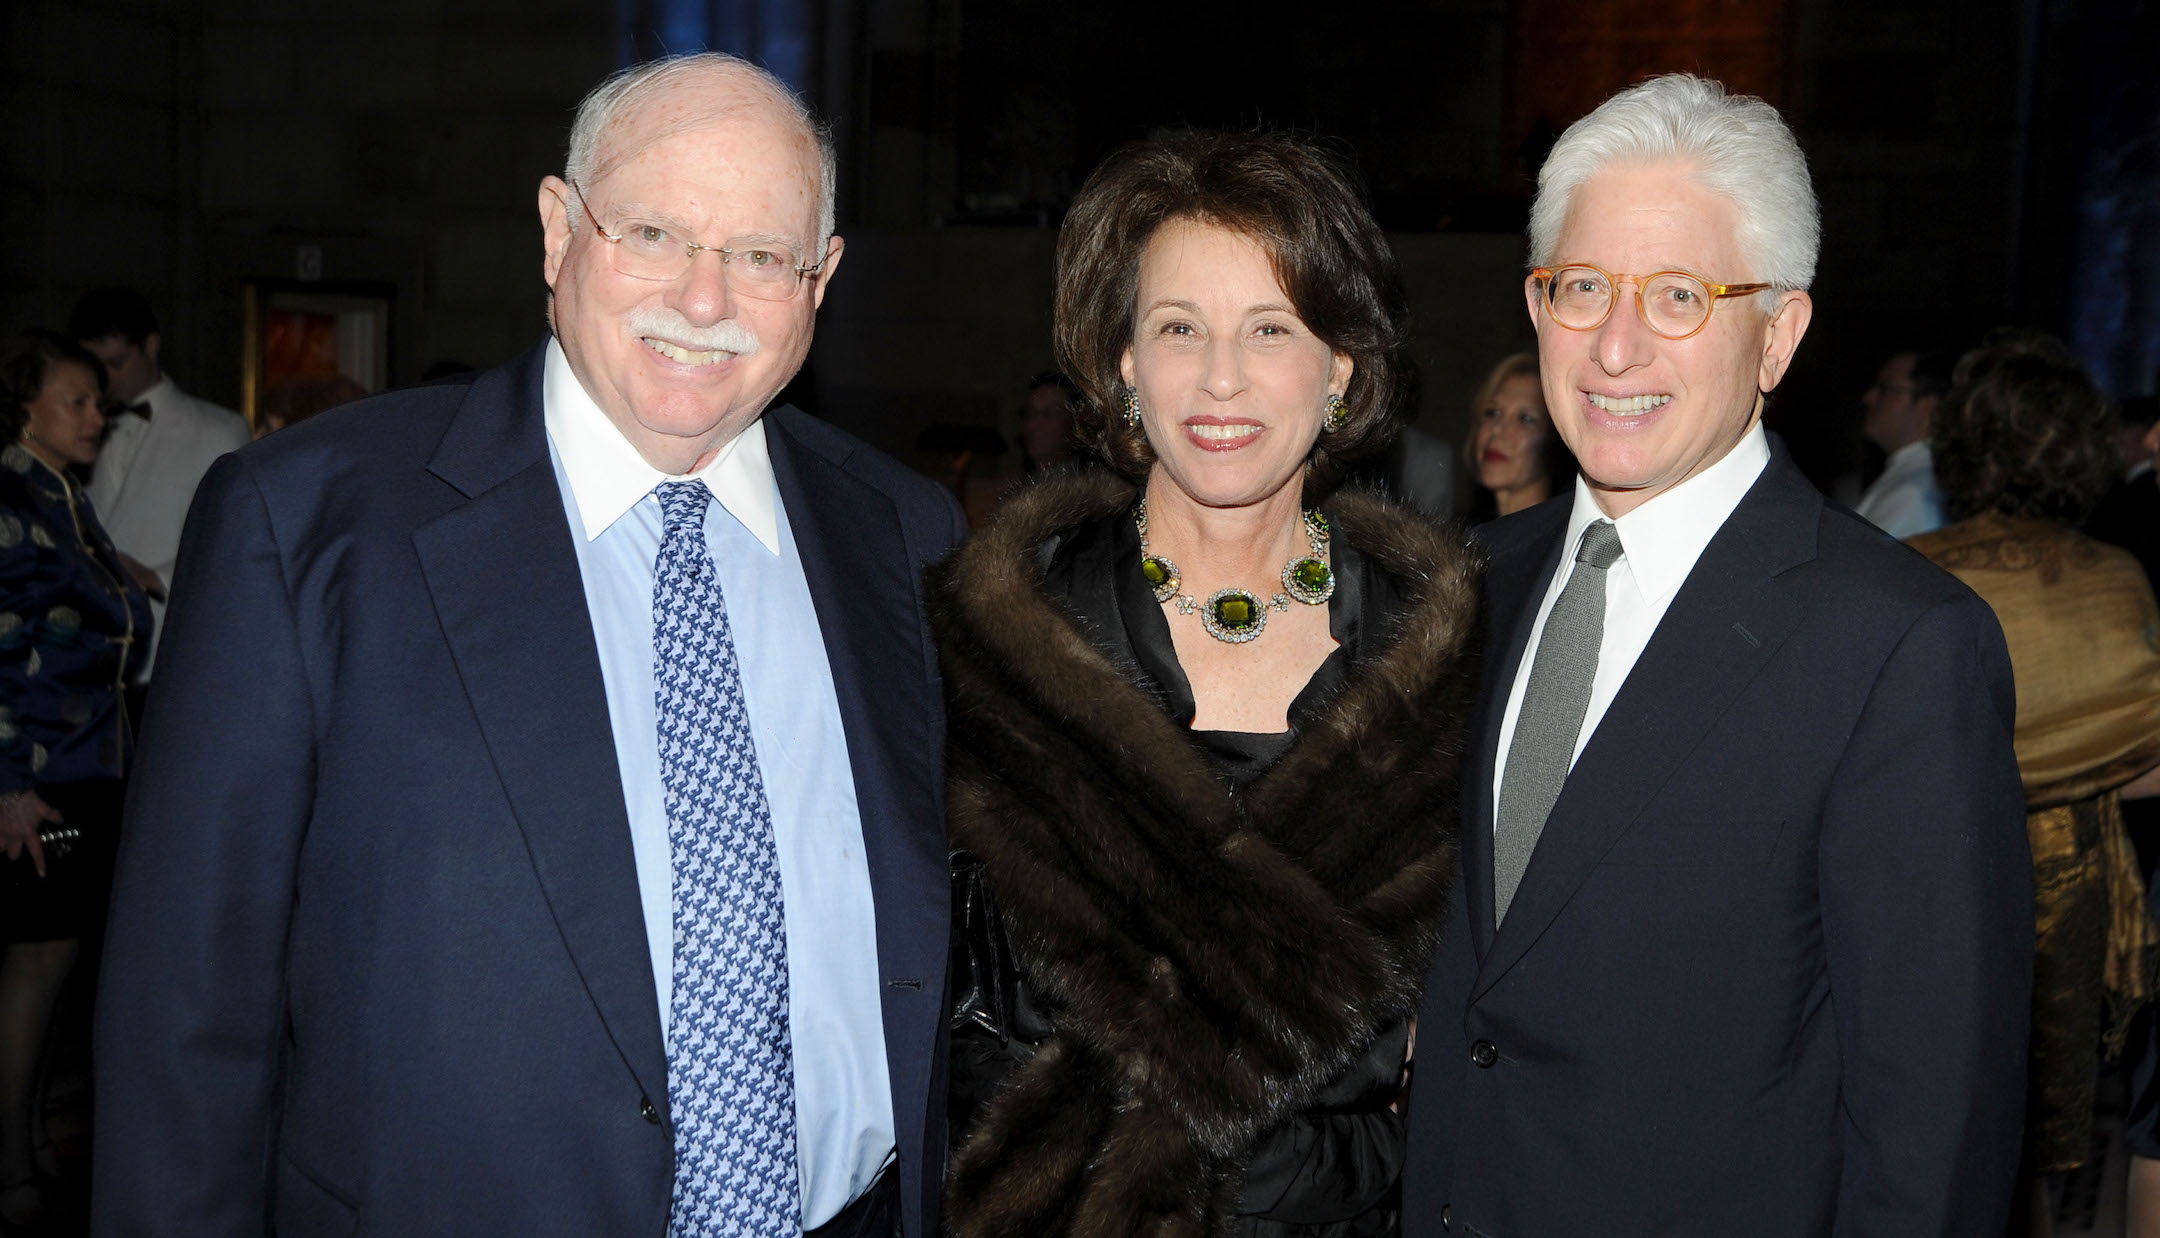 Museum donors Michael Steinhardt and Judy Steinhardt pose with museum director James Snyder